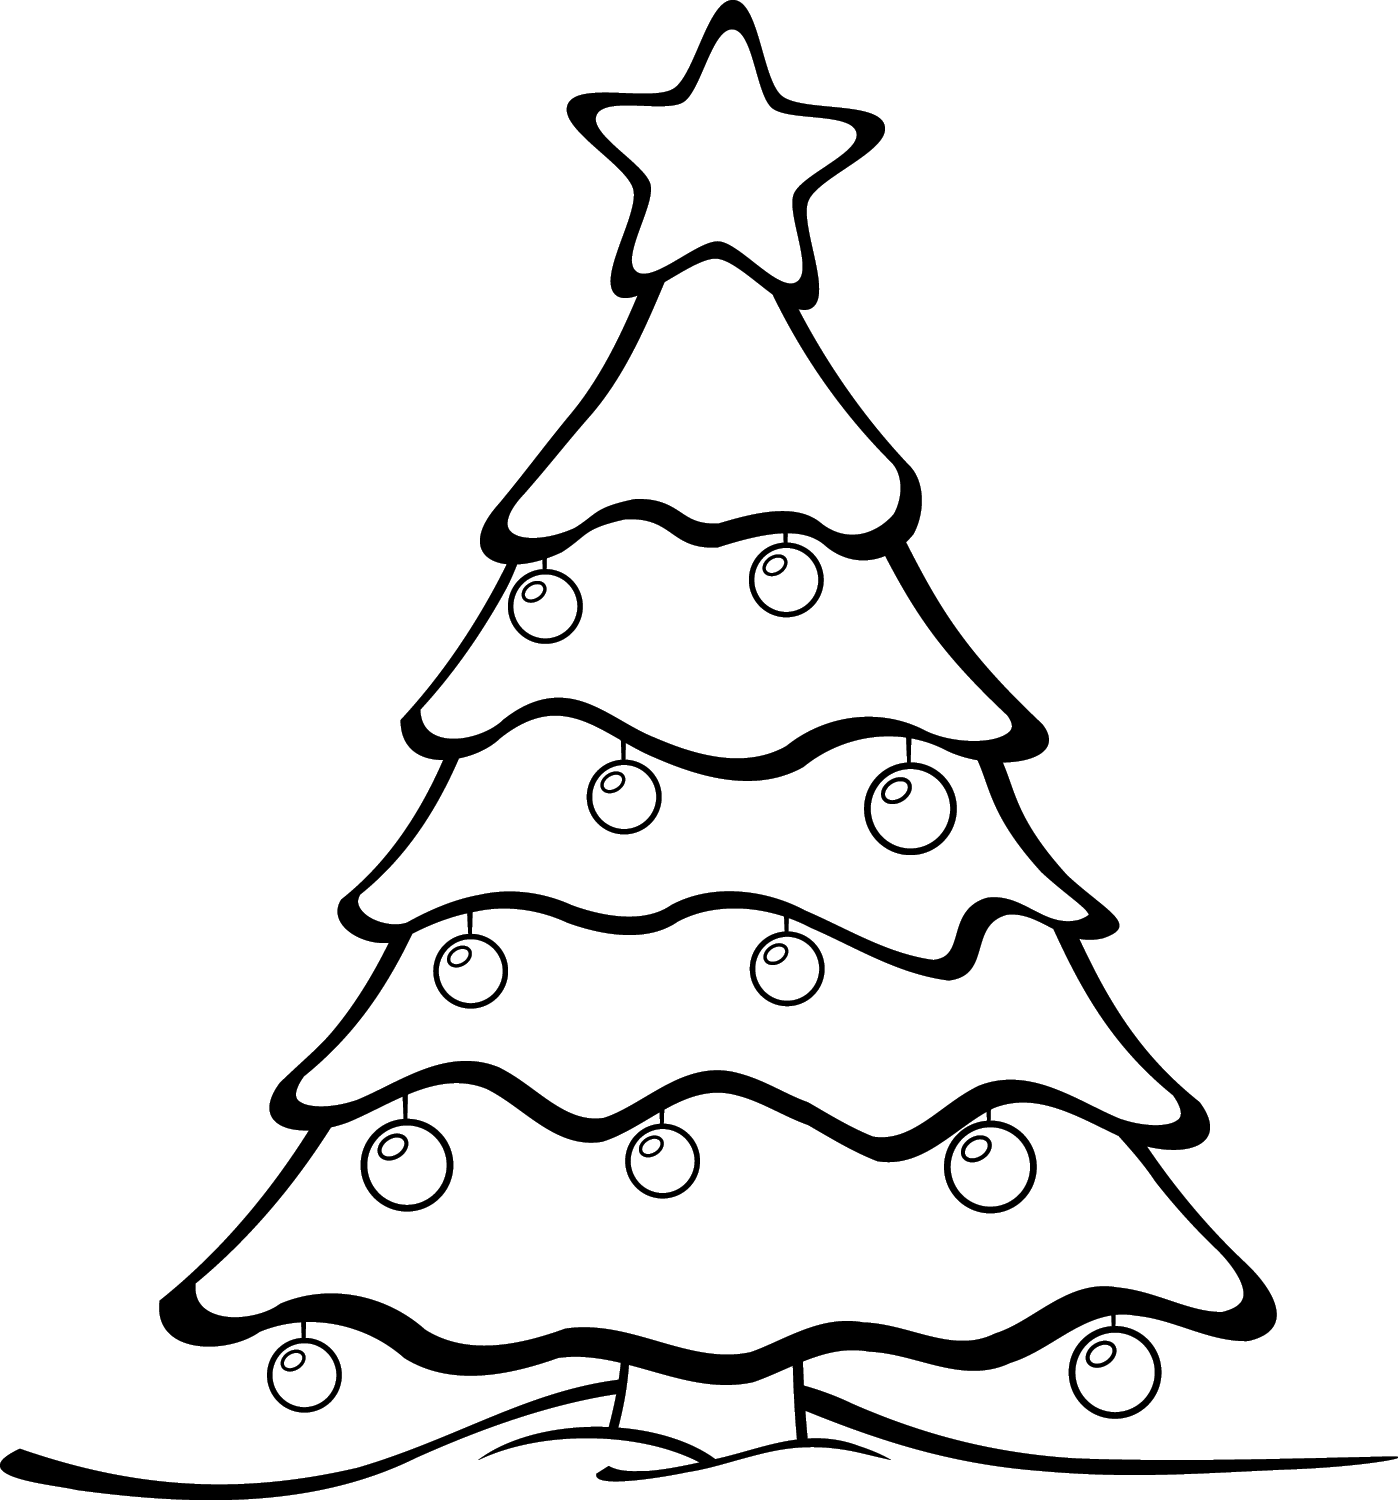 Christmas Tree Lights coloring pages Let the Land Produce. blank